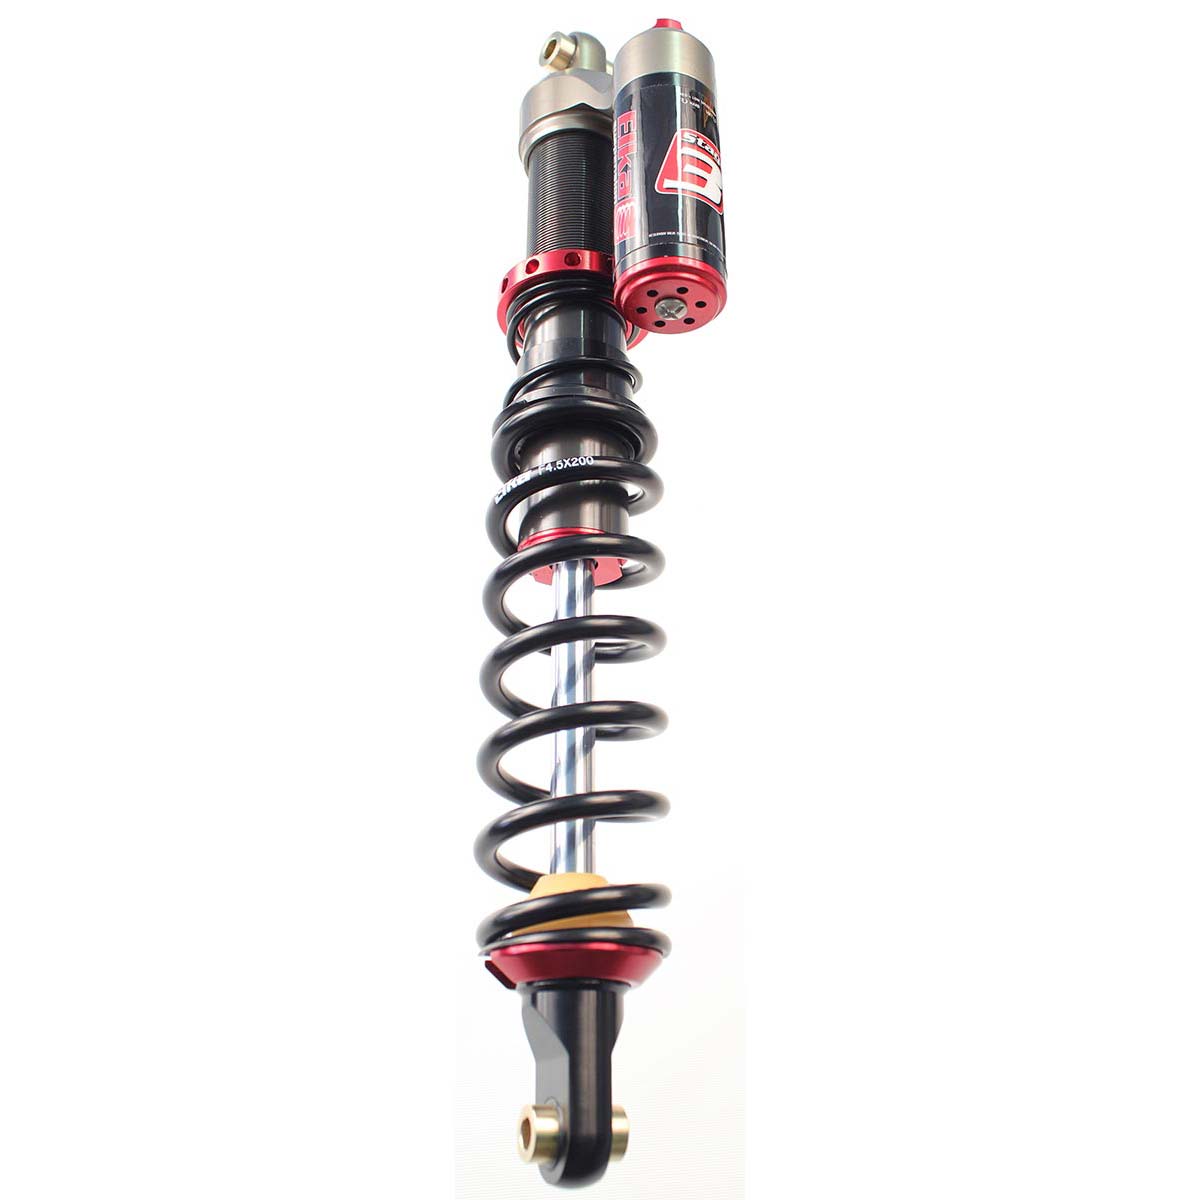 YAMAHA GRIZZLY 700 PERFORMANCE REAR SHOCK 07-11 